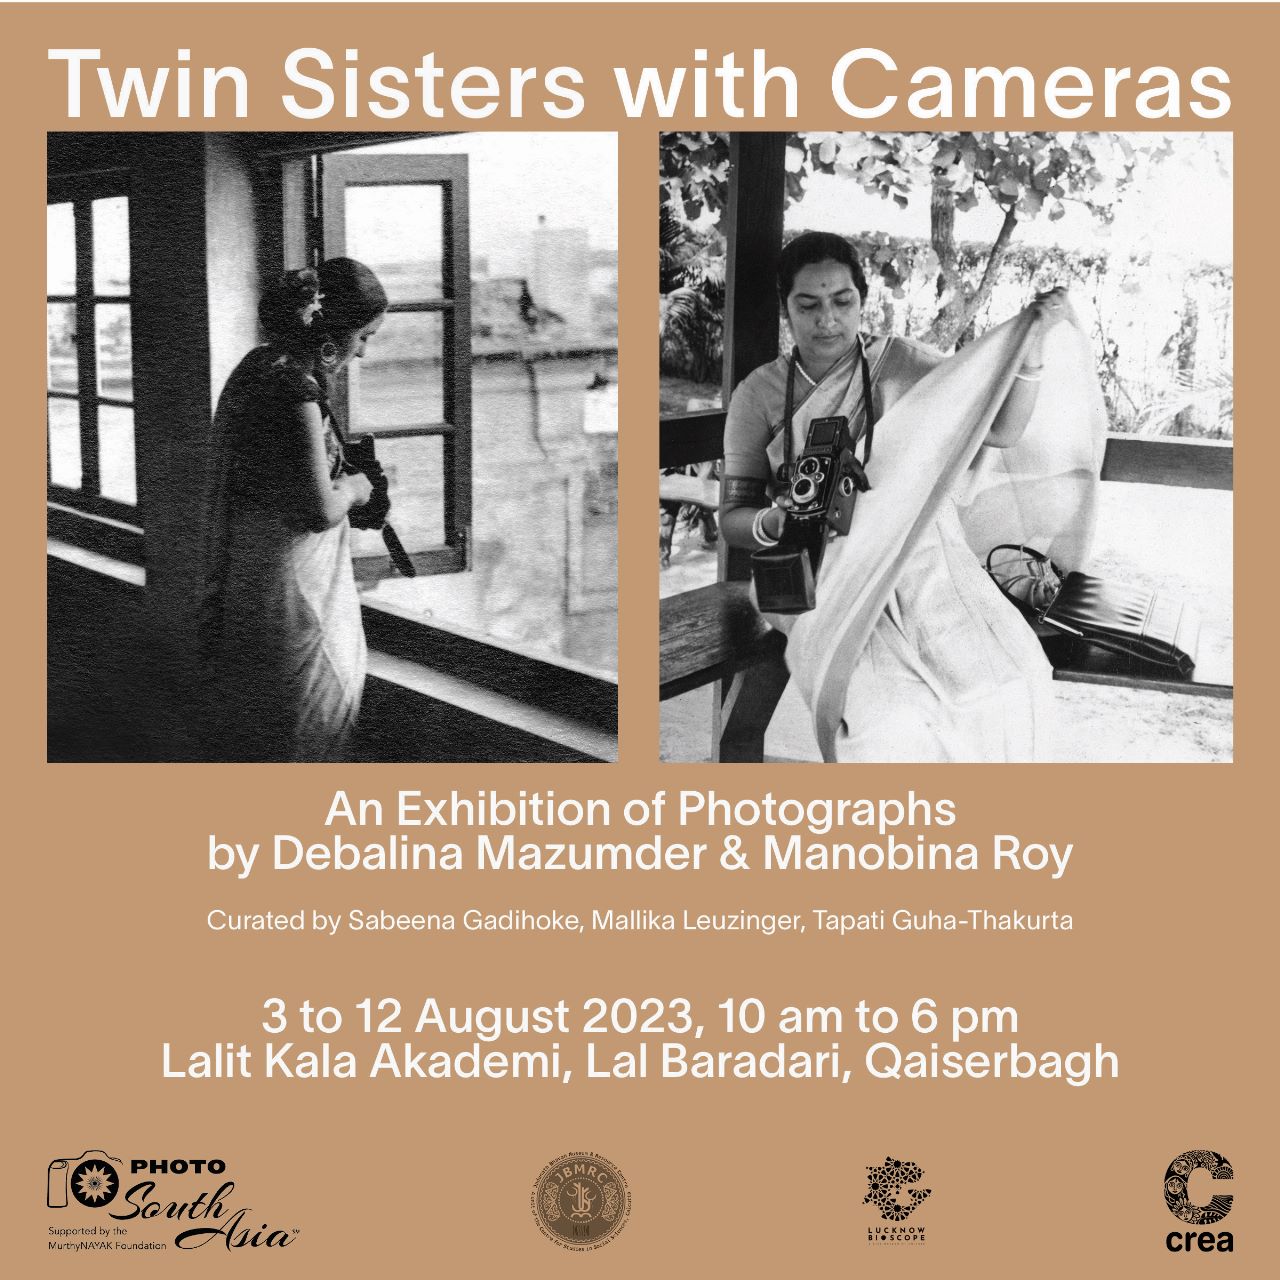 Lucknow hosts an exhibition of photographs clicked by twin sisters